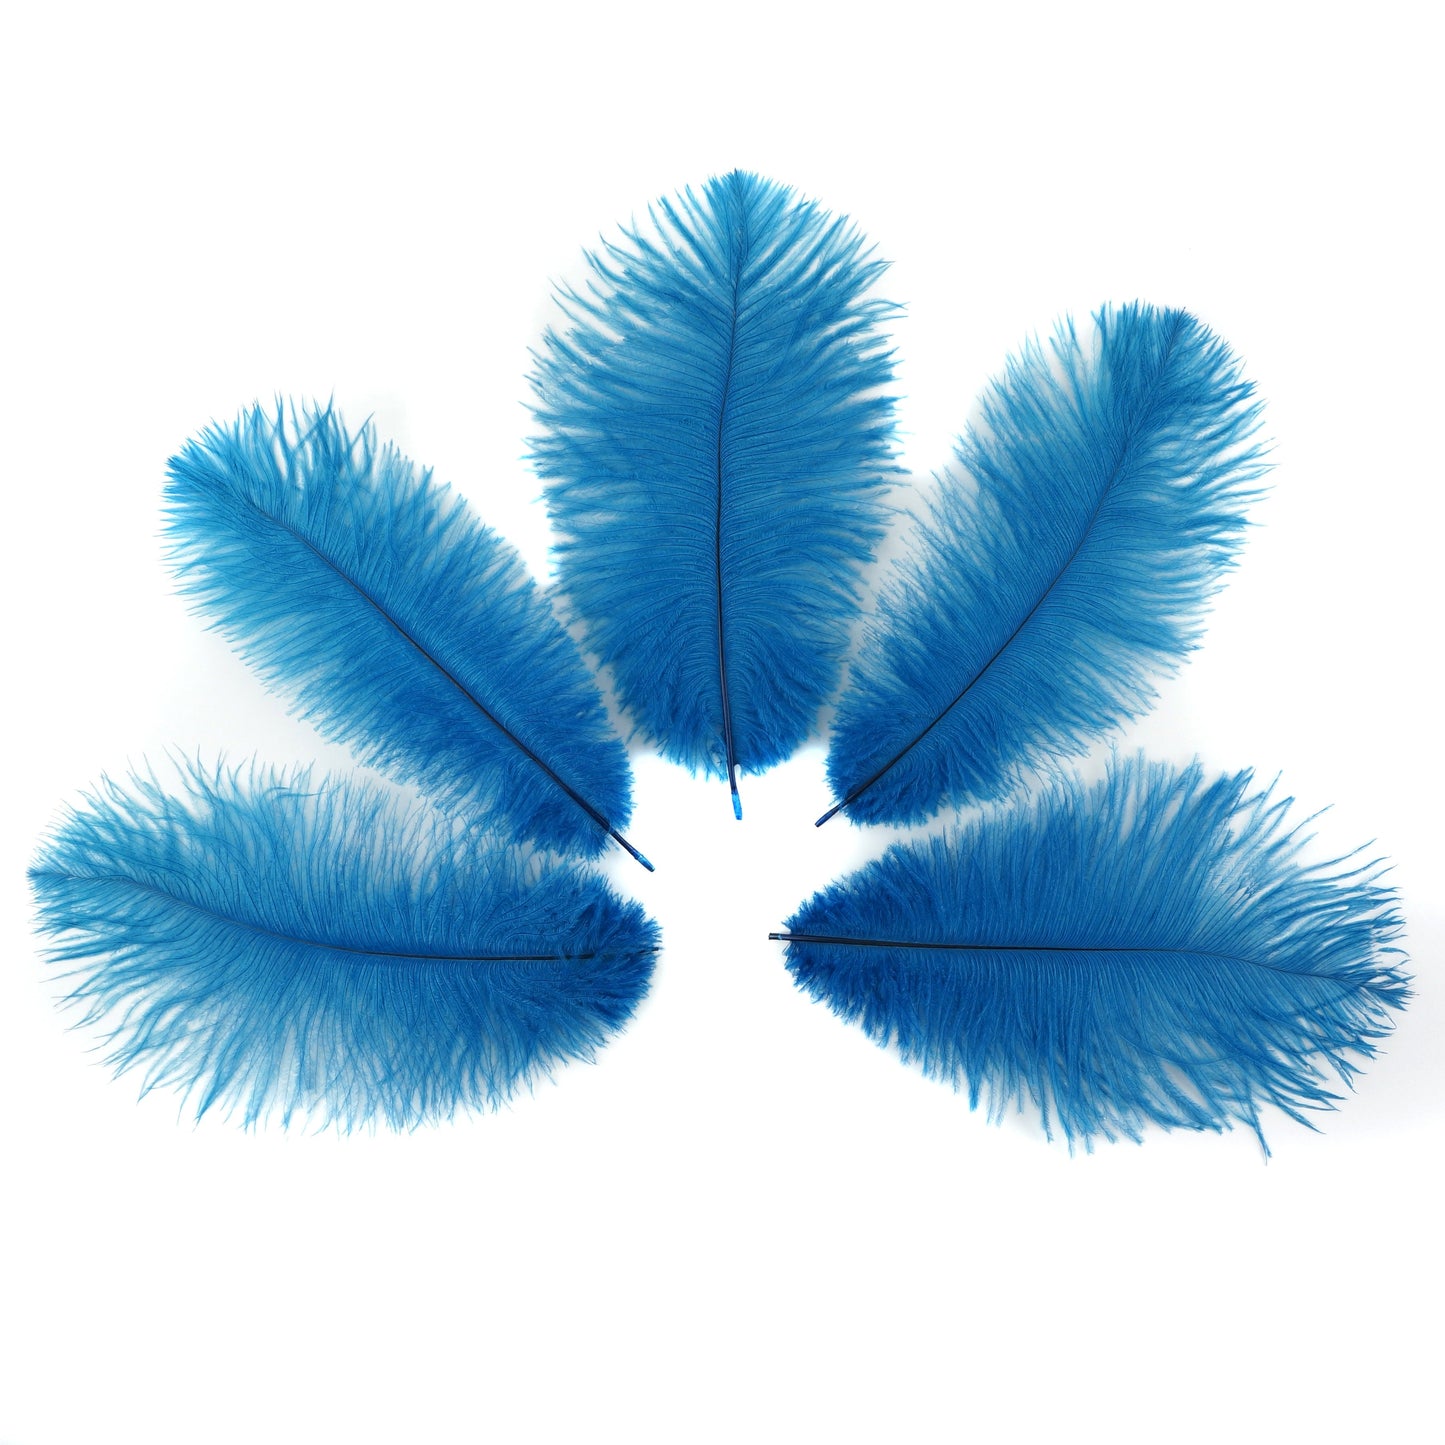 Ostrich Feathers 9-12" Drabs -  Dark Turquoise